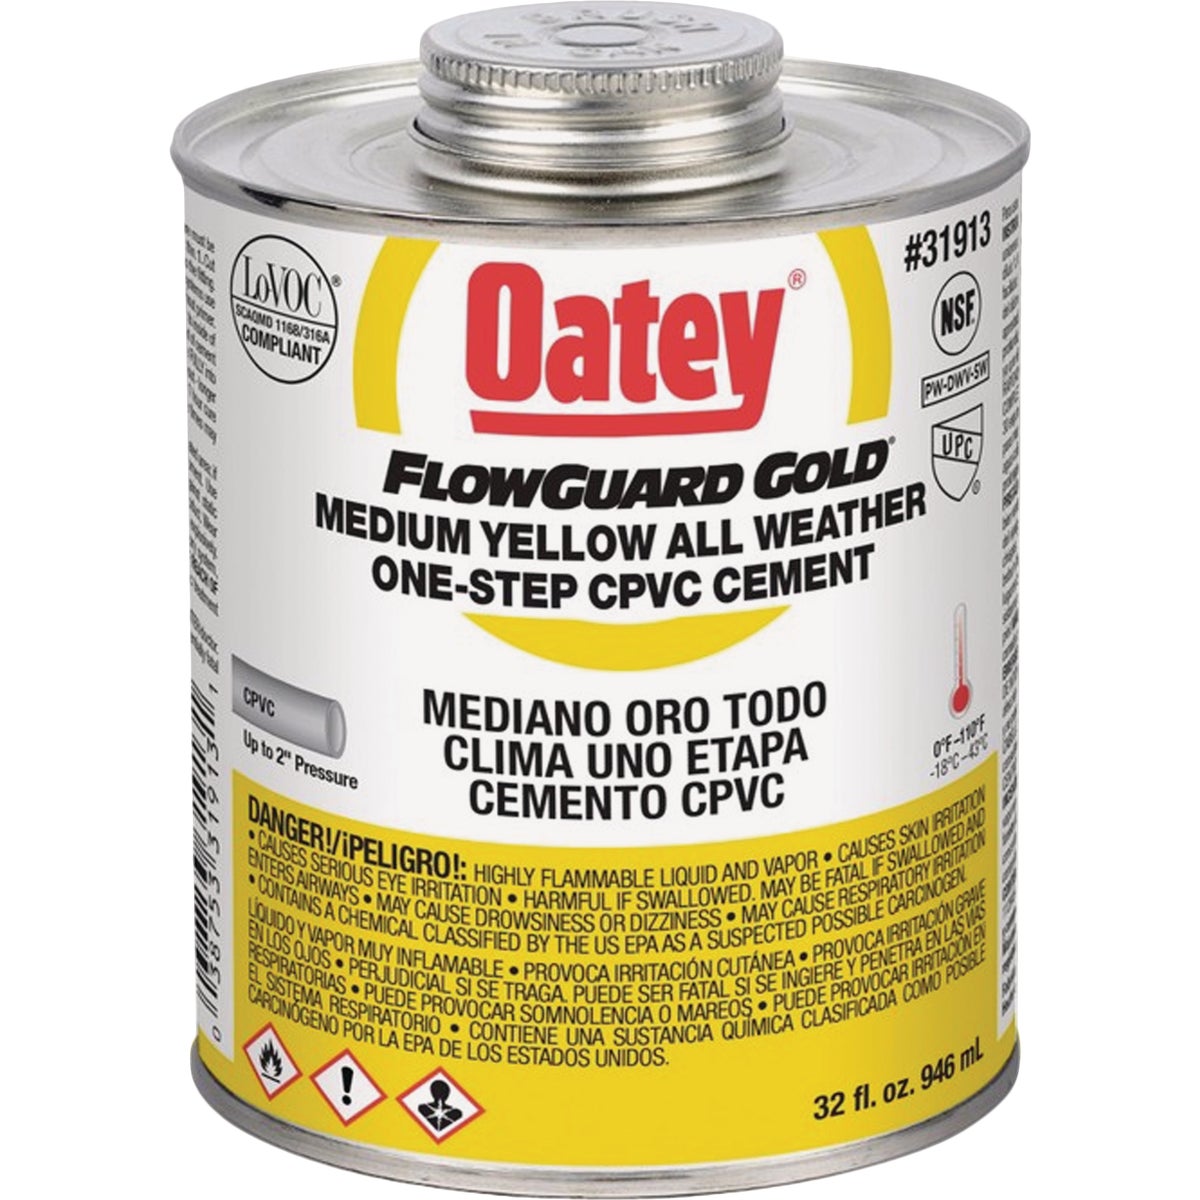 Oatey FlowGuard Gold 32 Oz. Medium Bodied Yellow All Weather One-Step CPVC Cement